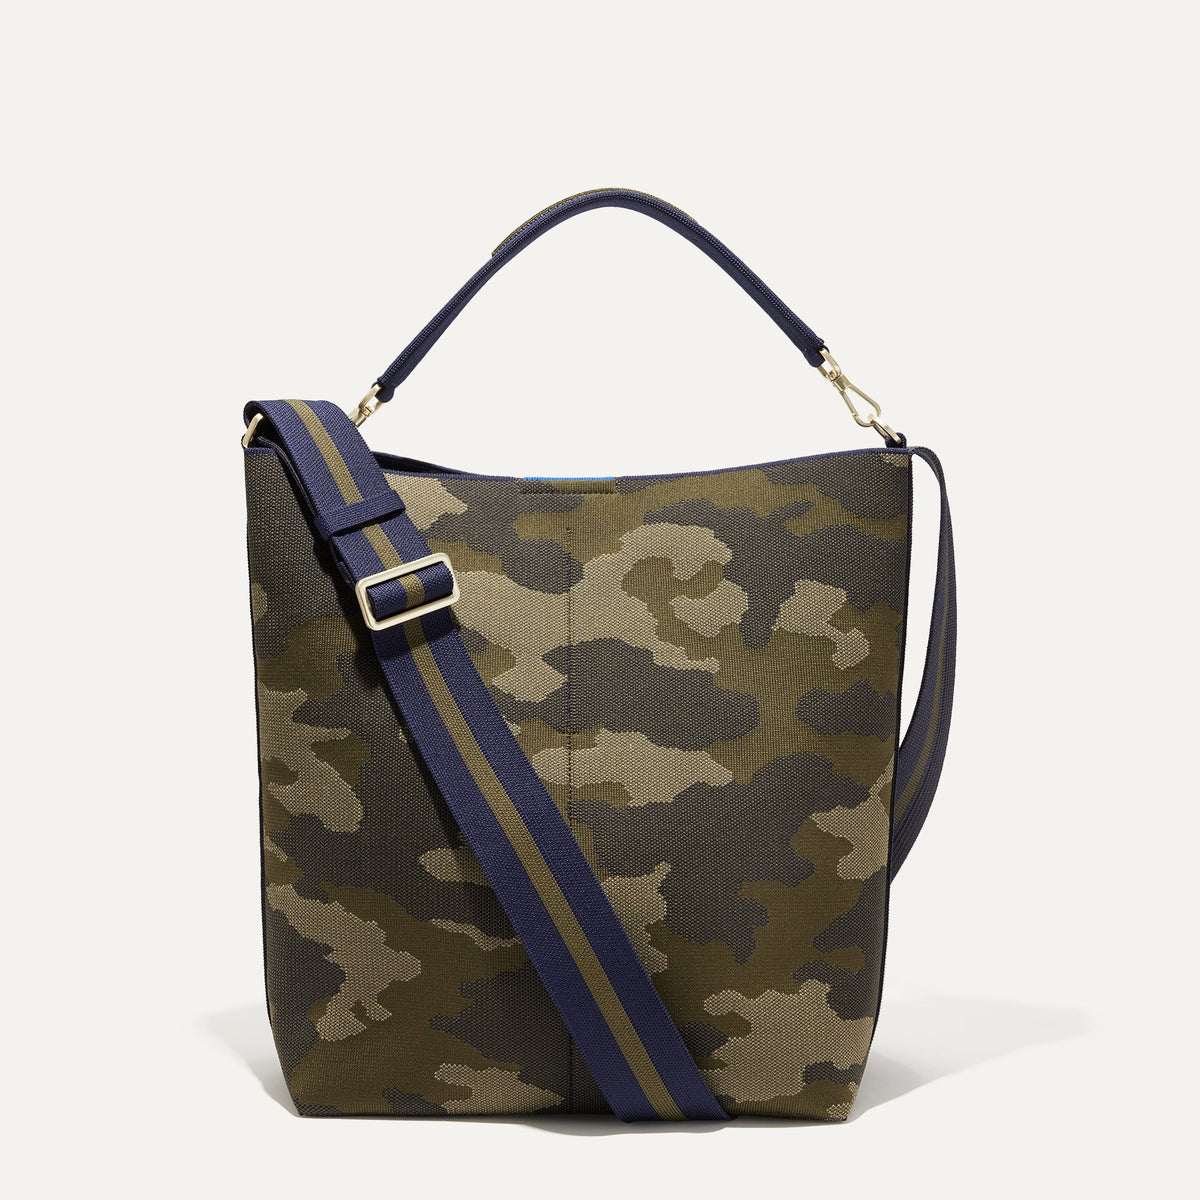 The Bucket Bag in Spruce Camo, Bags & Accessories